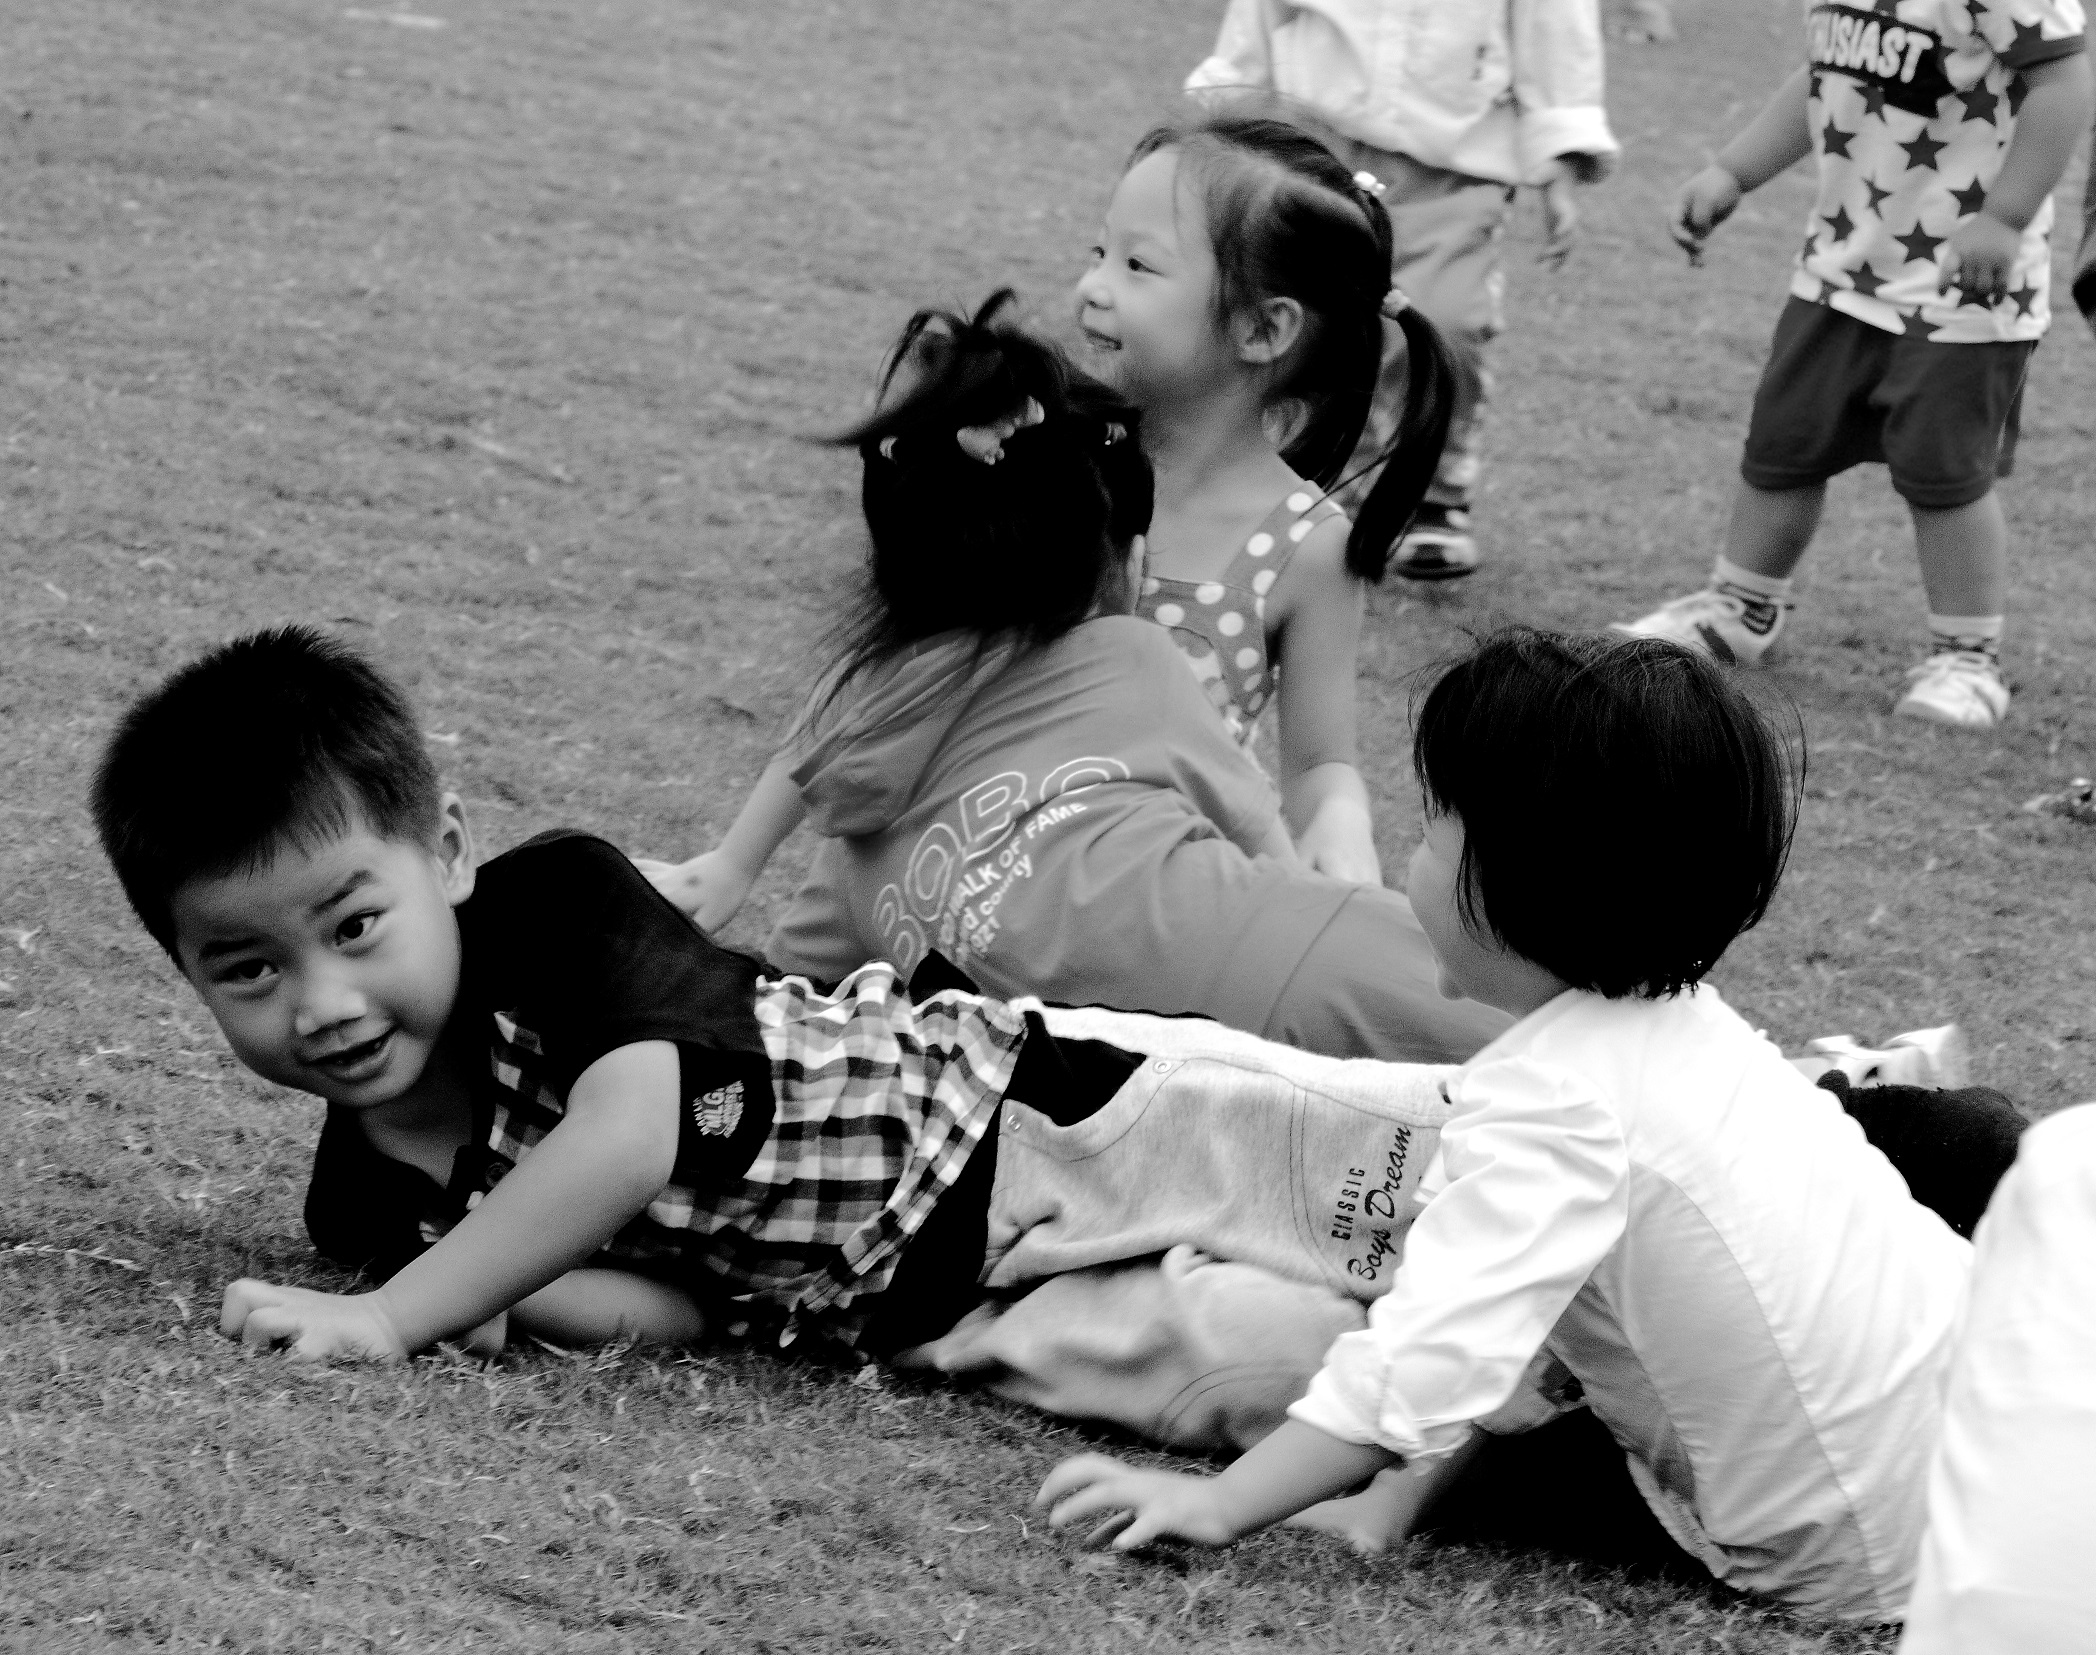 Kids playing in a park, Shanghai 2011